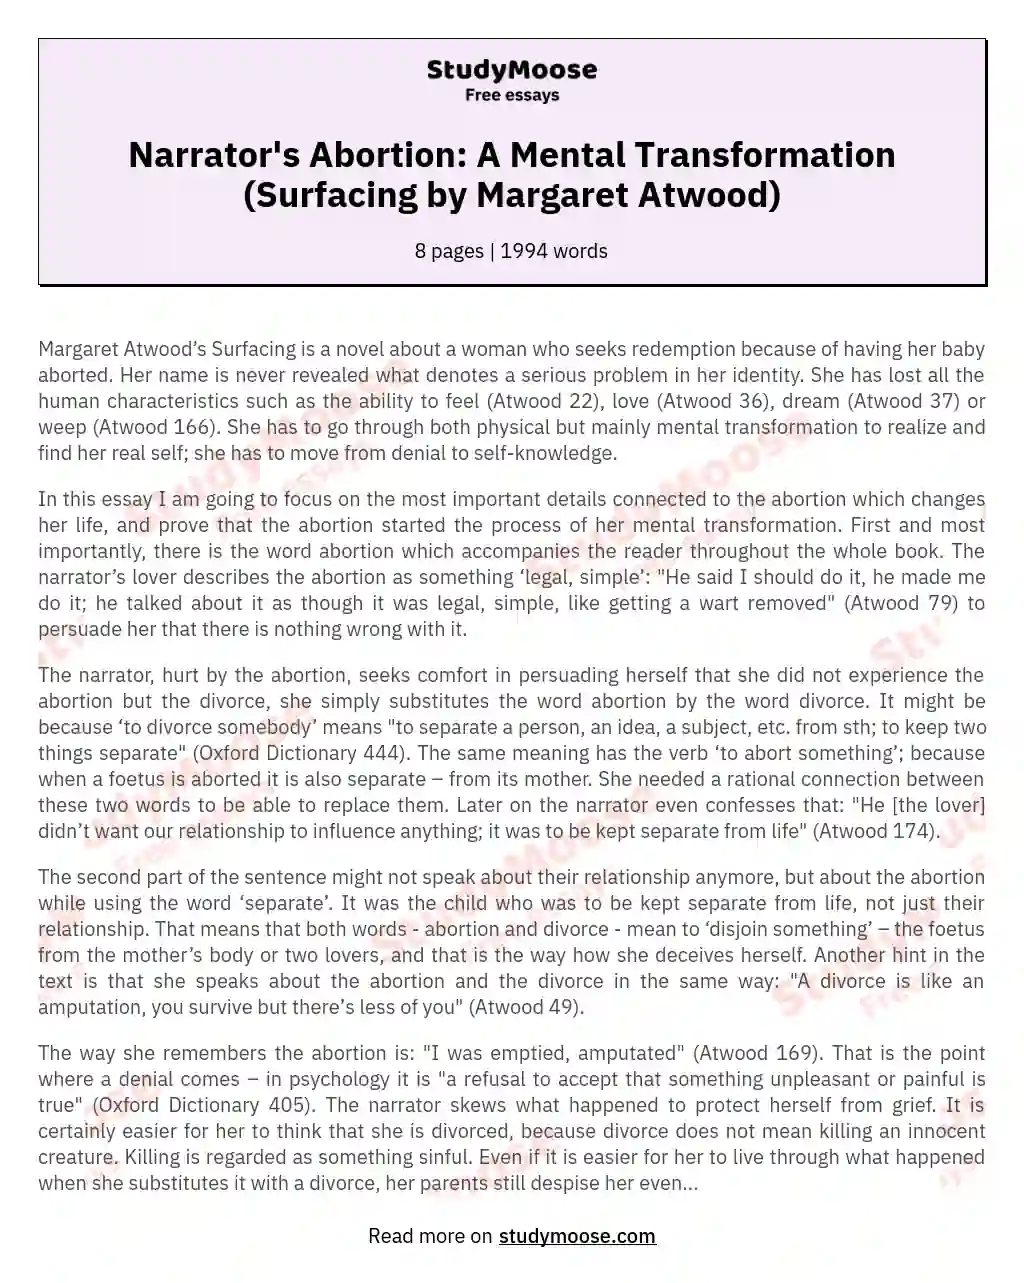 The Narrator’s Abortion Started the Process of her Mental Transformation (Margaret Atwood’s Surfacing)